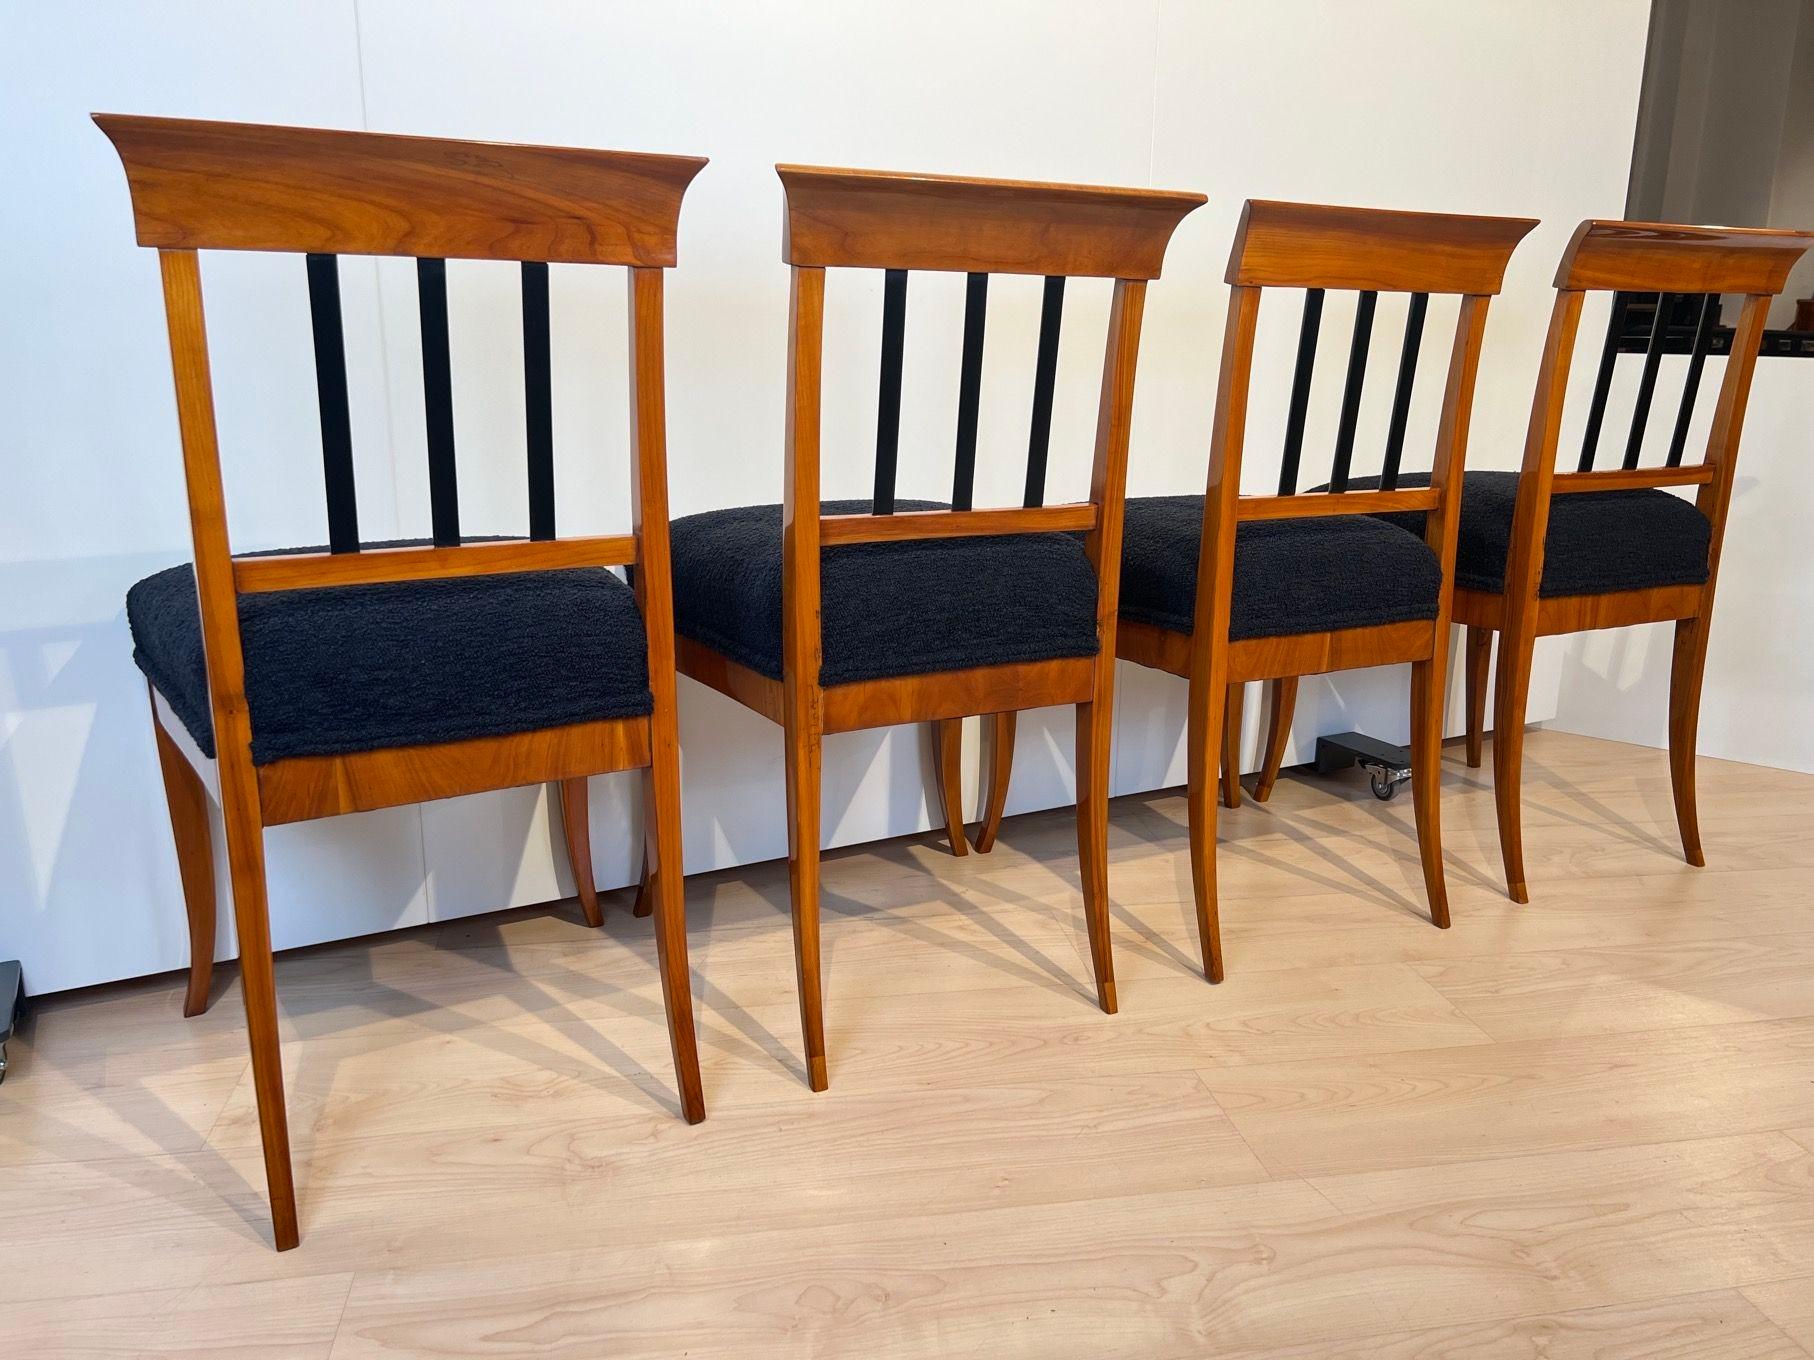 Set of Six Biedermeier Chairs, Cherry Wood, Ebony, South Germany circa 1830 In Good Condition For Sale In Regensburg, DE